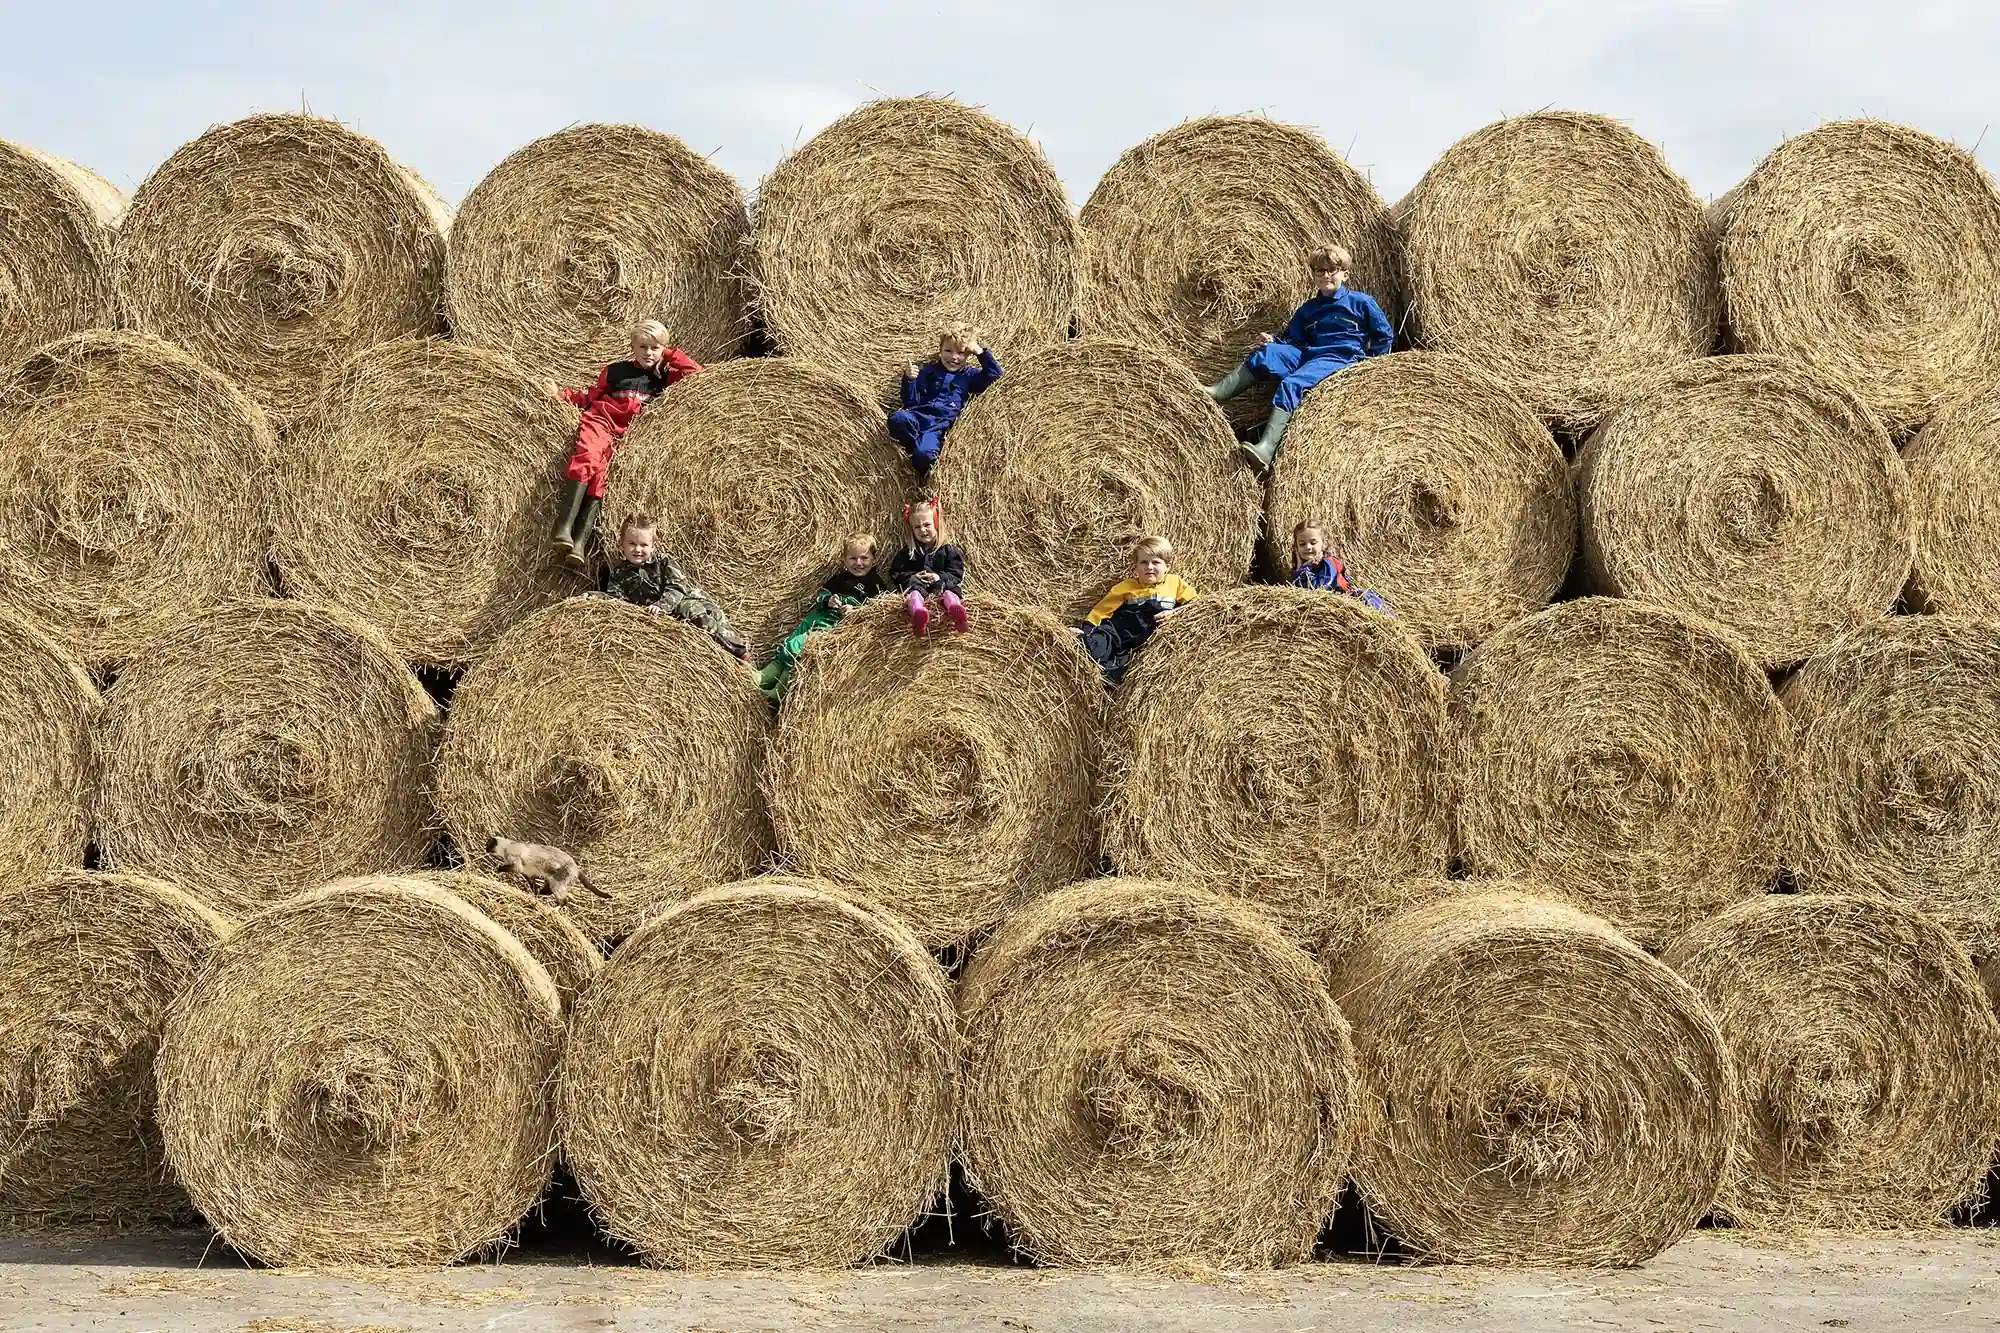 A group of people lie and sit on large cylindrical hay bales stacked in a pyramid formation.